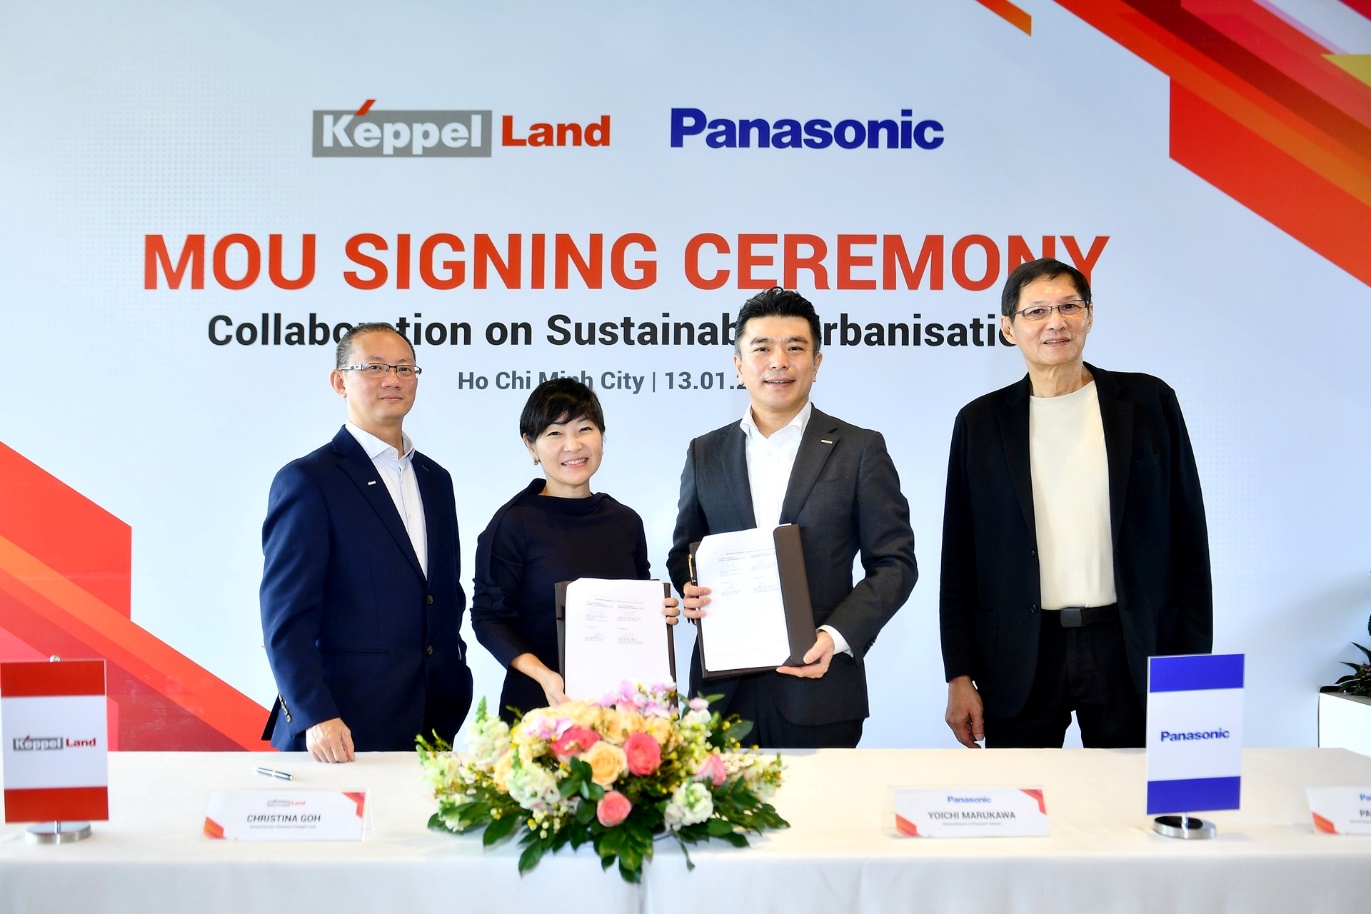 Photo: Representatives from Keppel Land Vietnam and Panasonic Vietnam at the MOU signing ceremony